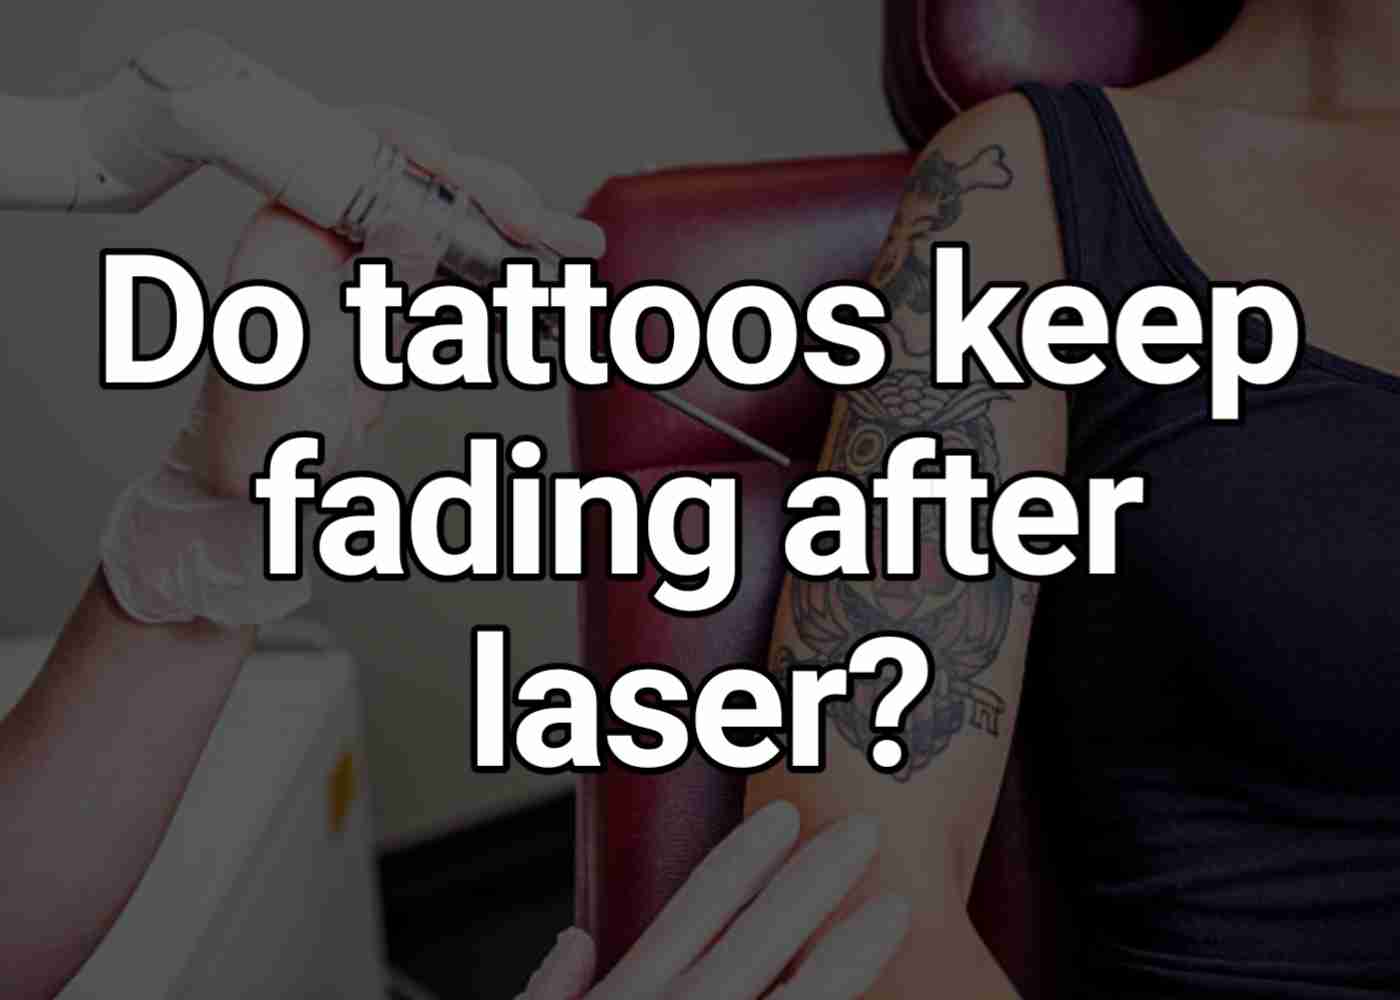 Do tattoos keep fading after laser